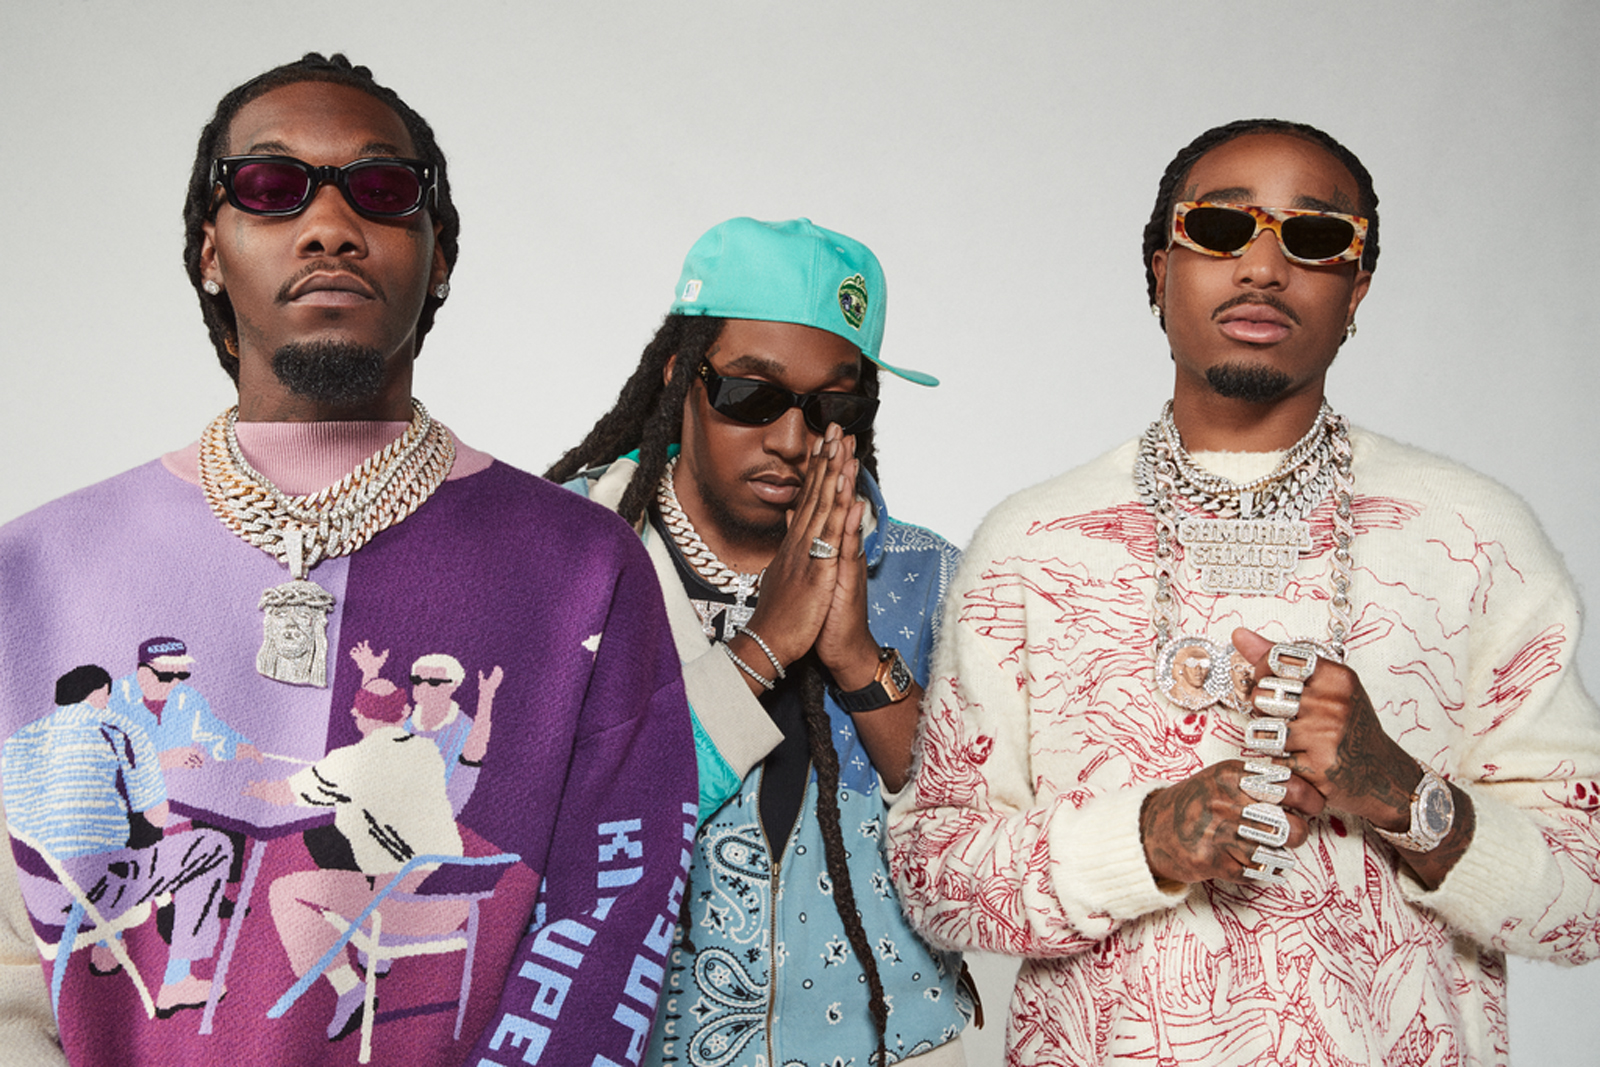 Migos Deliver a Record for a World That’s Ready to Reopen With ‘Culture III’